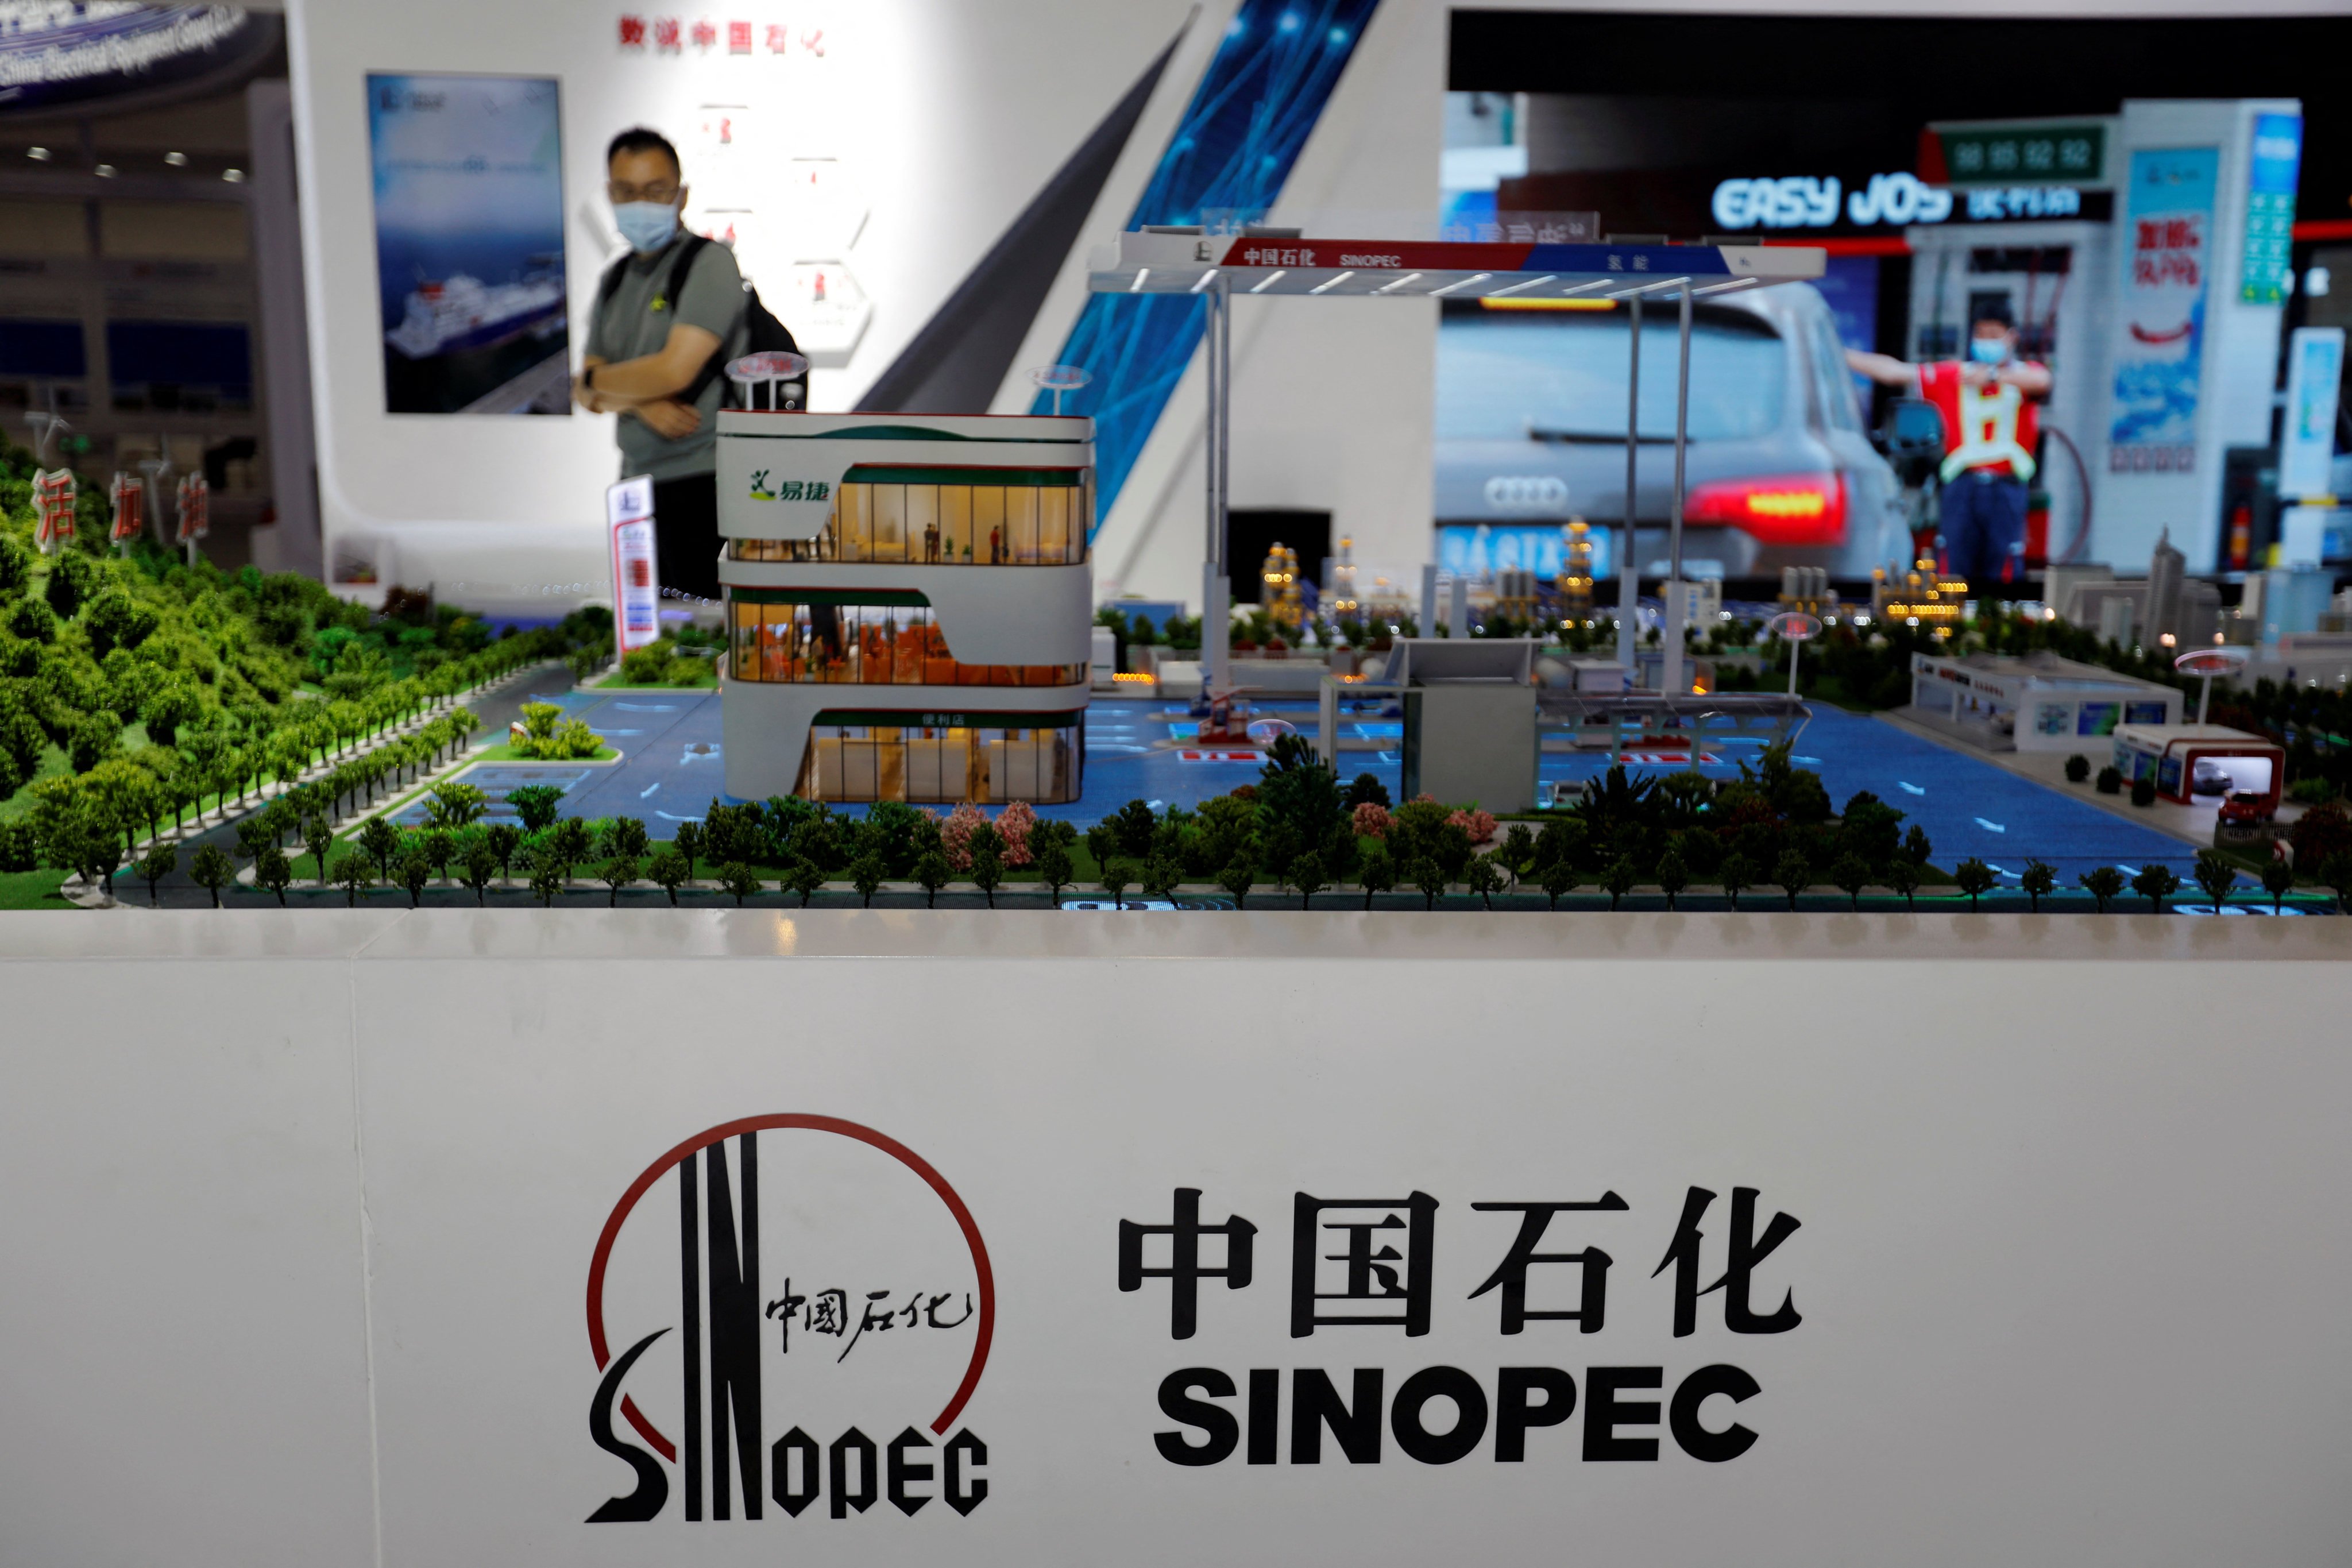 Sinopec, China’s largest oil refiner, is pivoting its ambitions to match the growth of the mainland’s NEV sector. Photo: Reuters